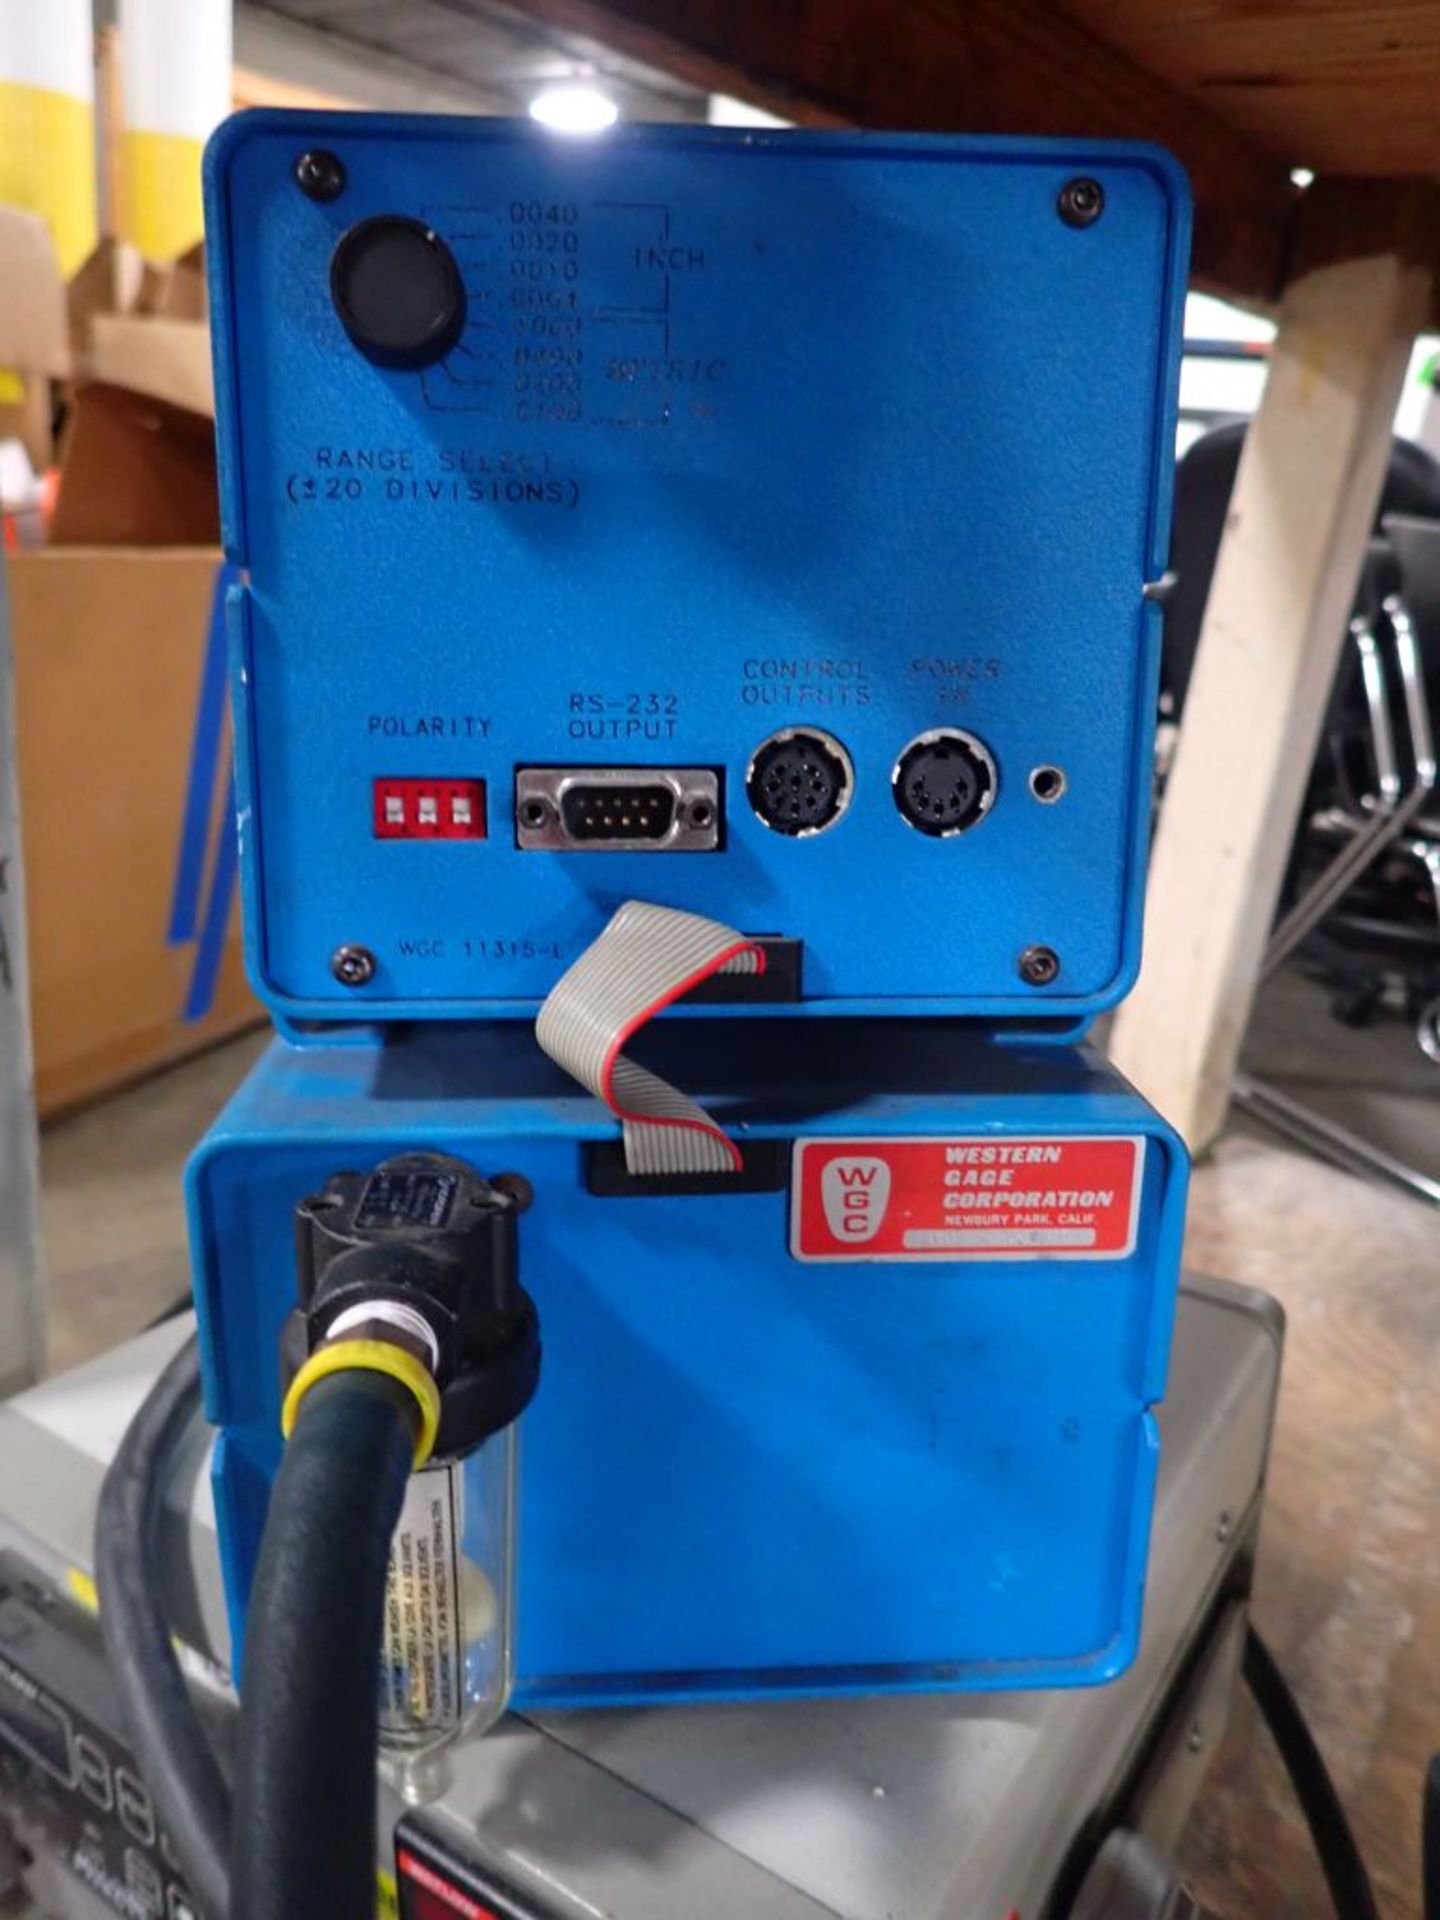 Lot of Digital Meters | Tag: 241641 | Limited Forklift Assistance Available - $10.00 Lot Loading - Image 5 of 7